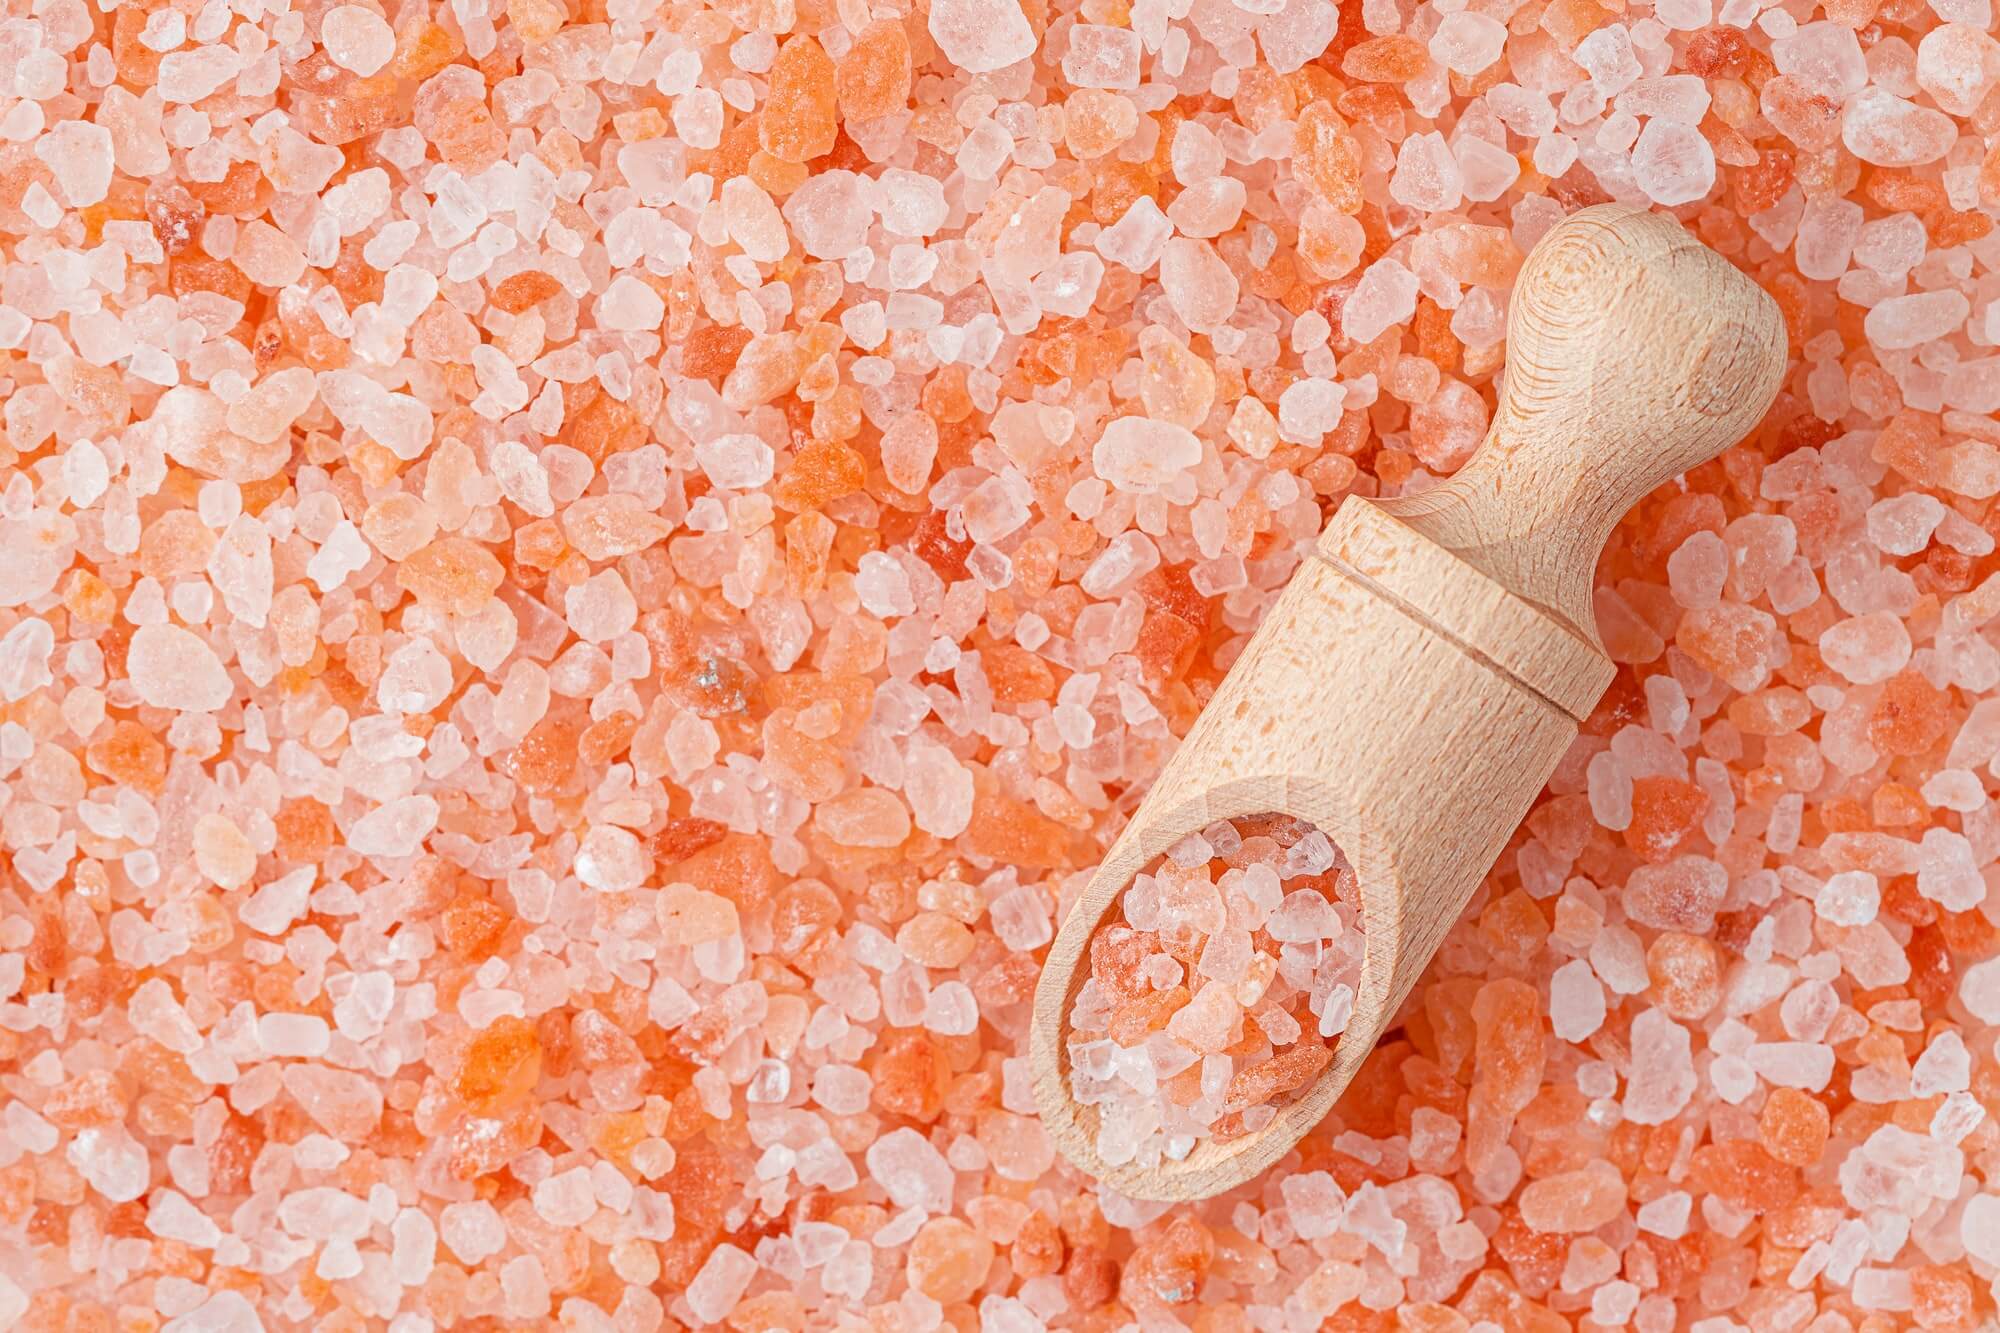 Himalayan pink salt background and wooden scoop.